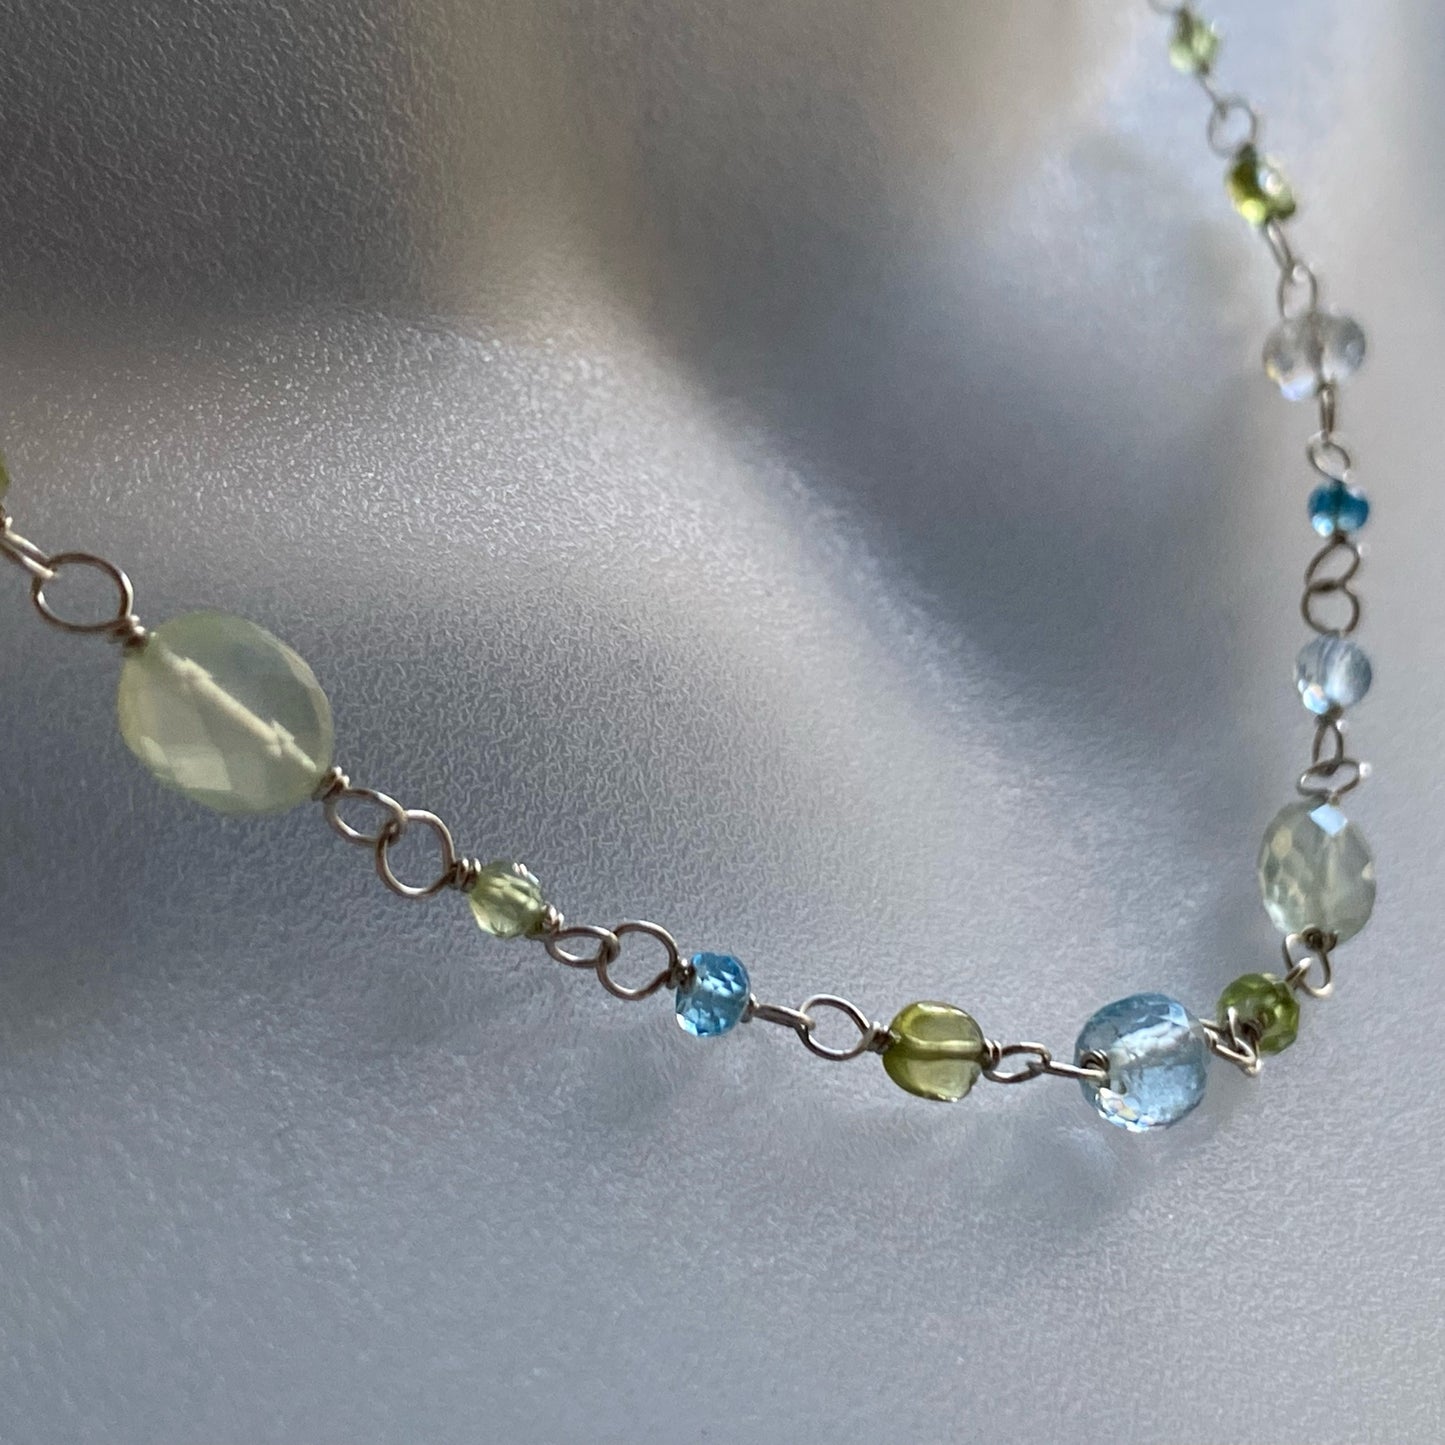 Peridot and Topaz collector necklace